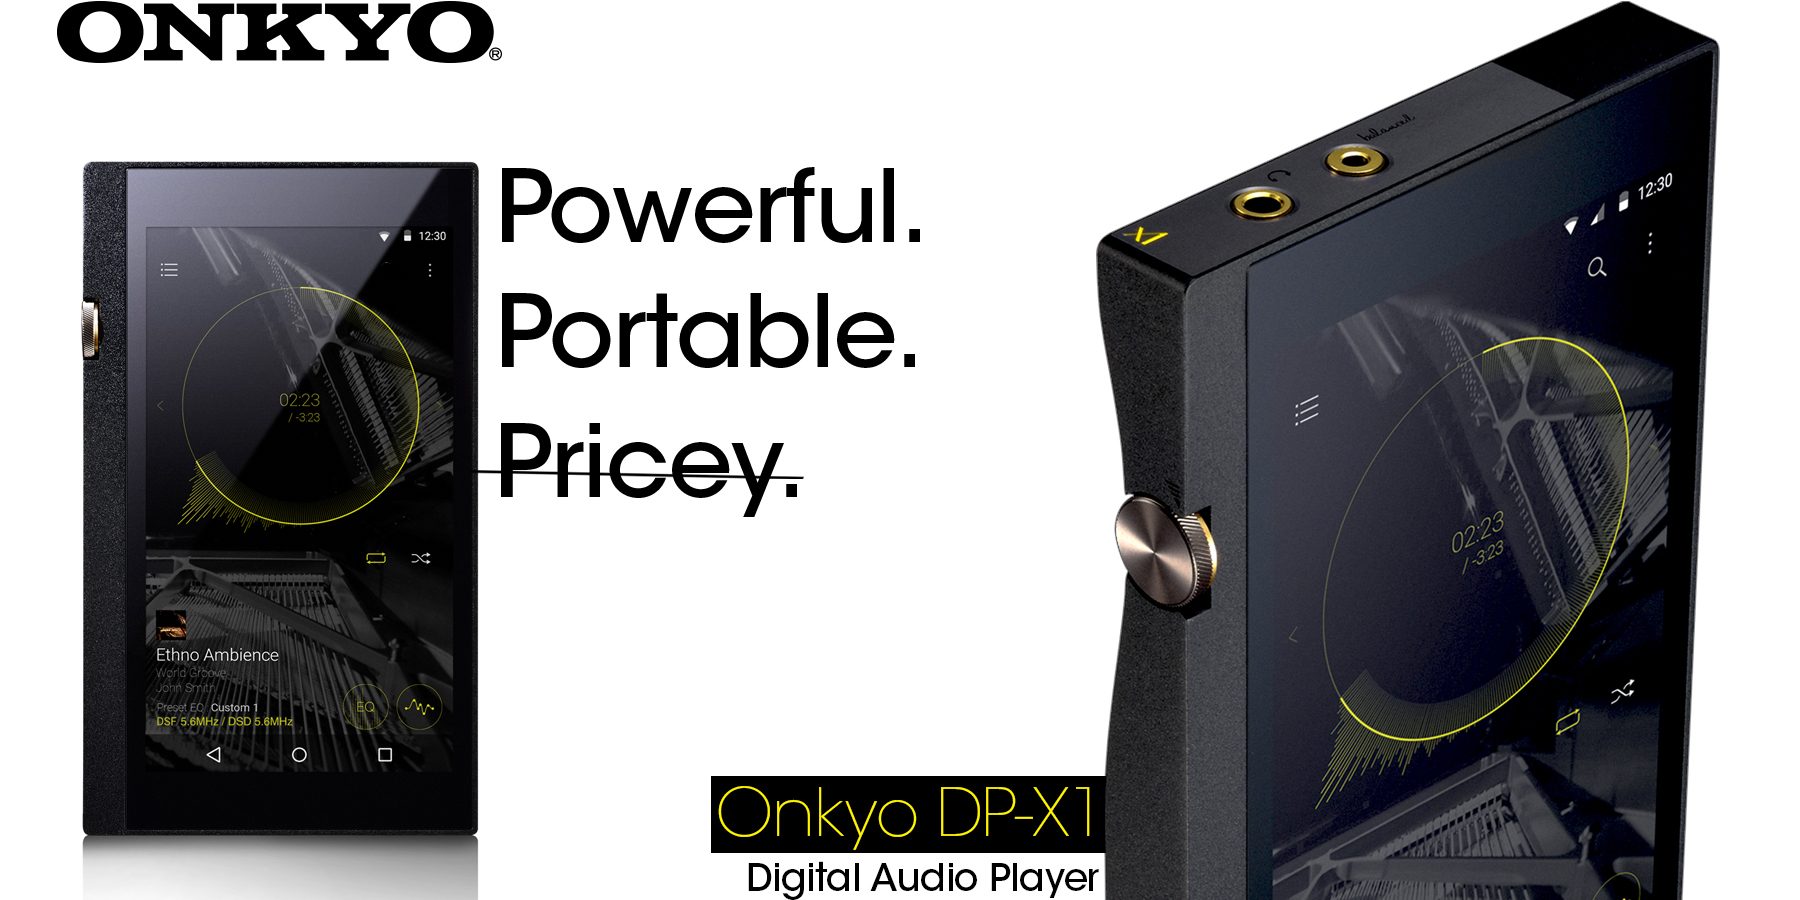 Onkyo's high-end DP-X1 media player runs Android and isn't too